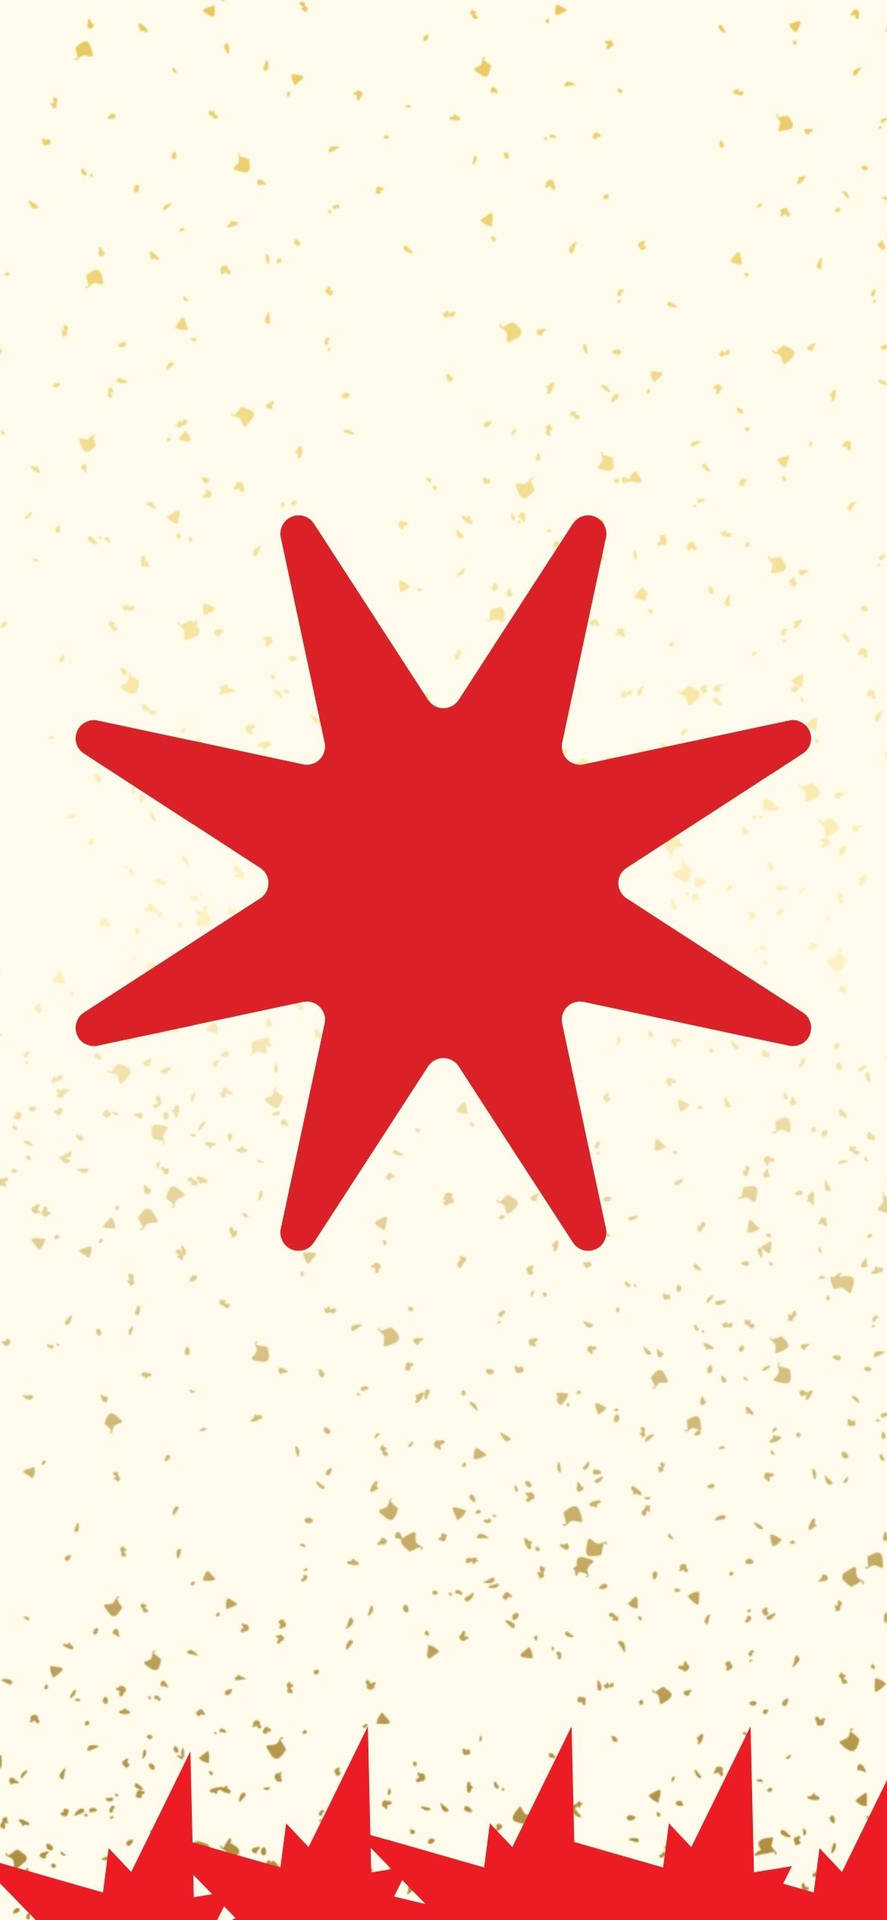 Eight Angled Red Star Background